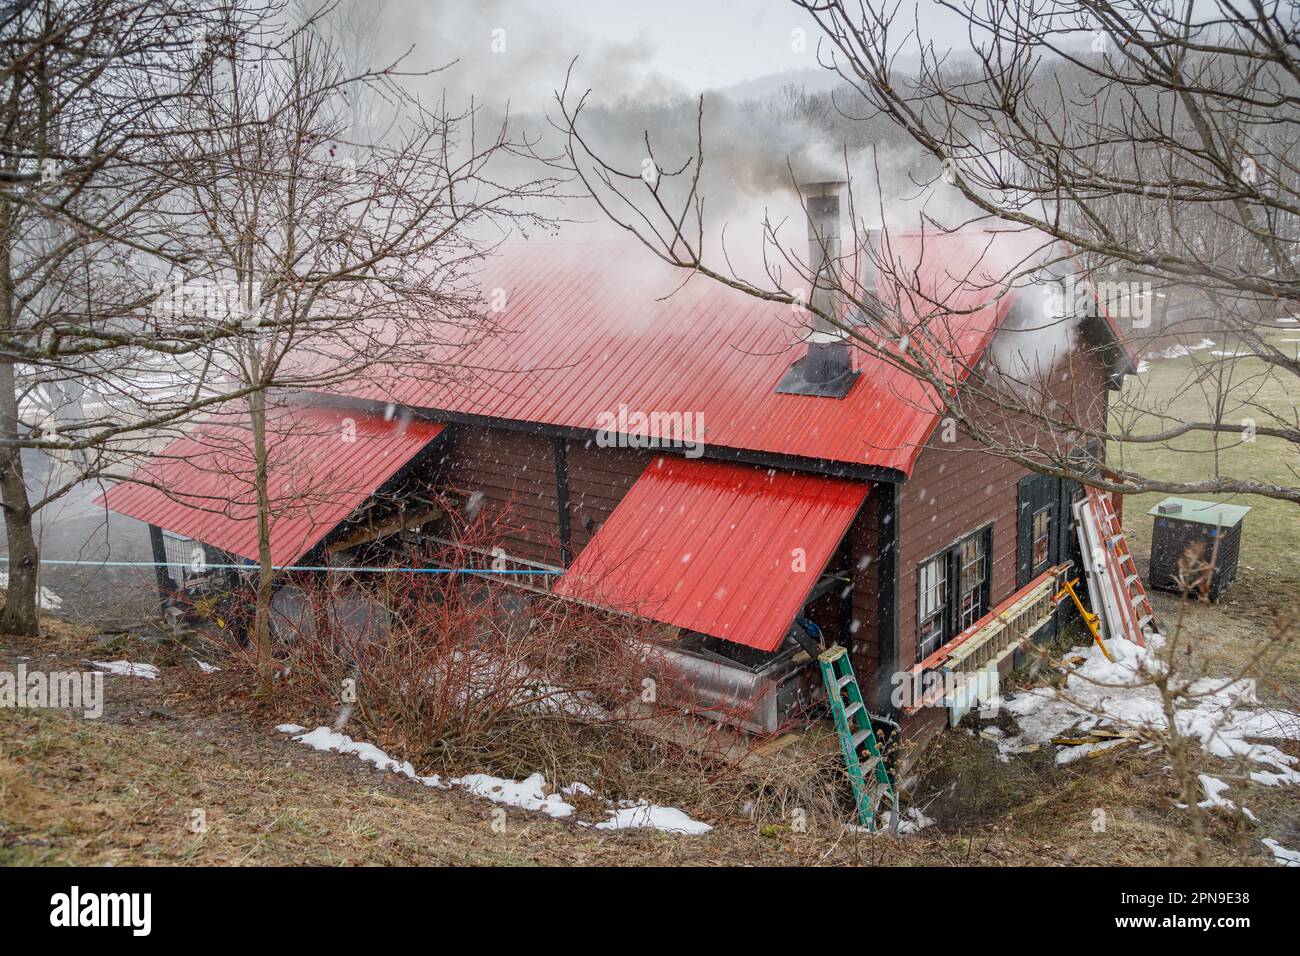 Sap house while boiling to make maple syrup, Roseboom, Otsego County, rural New York State Stock Photo